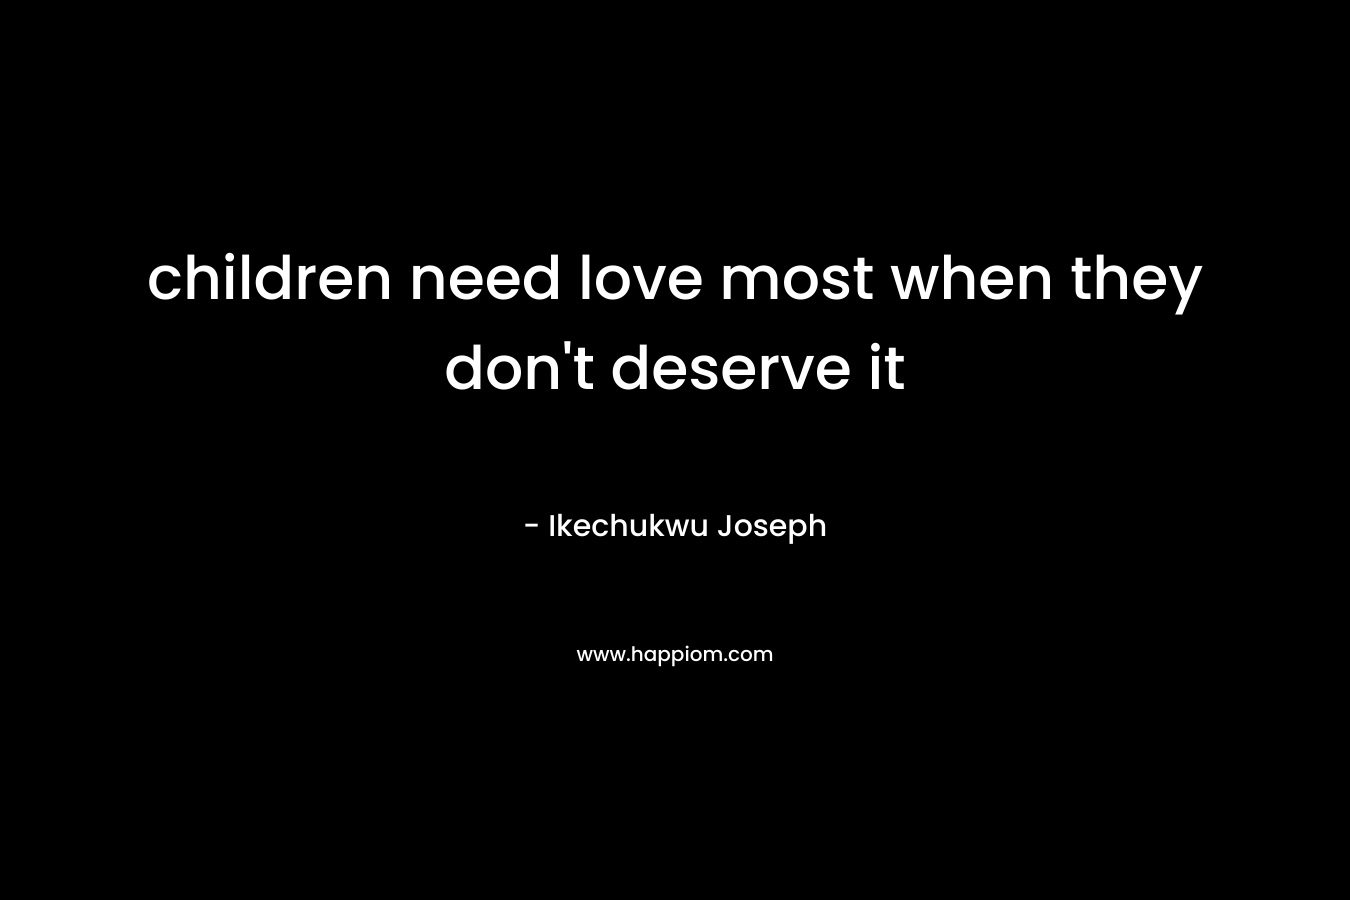 children need love most when they don't deserve it